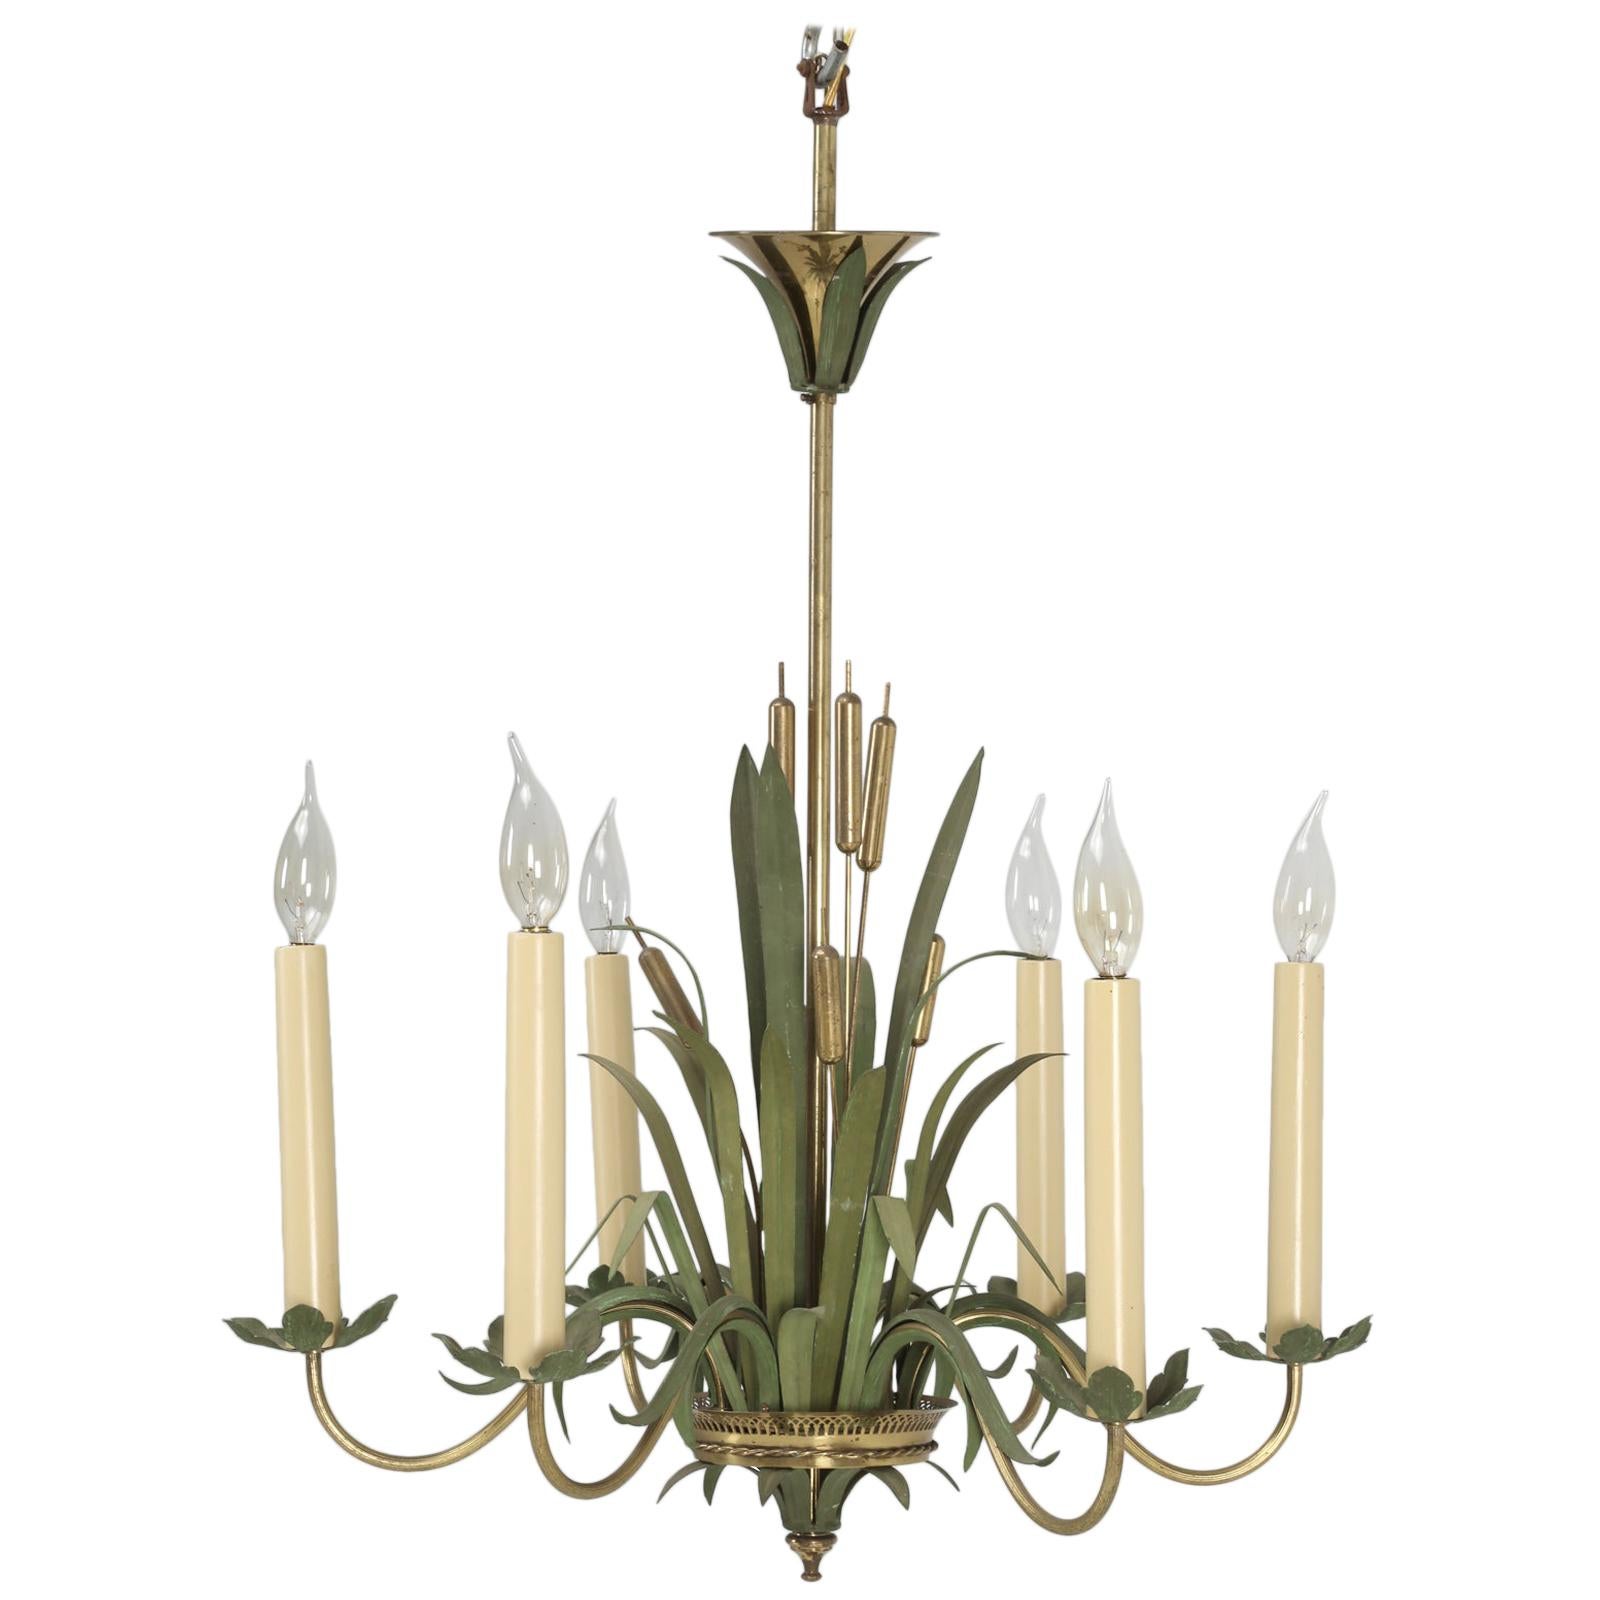 Vintage French 6-Light Painted Cattail Chandelier in the Style of Maison Jansen